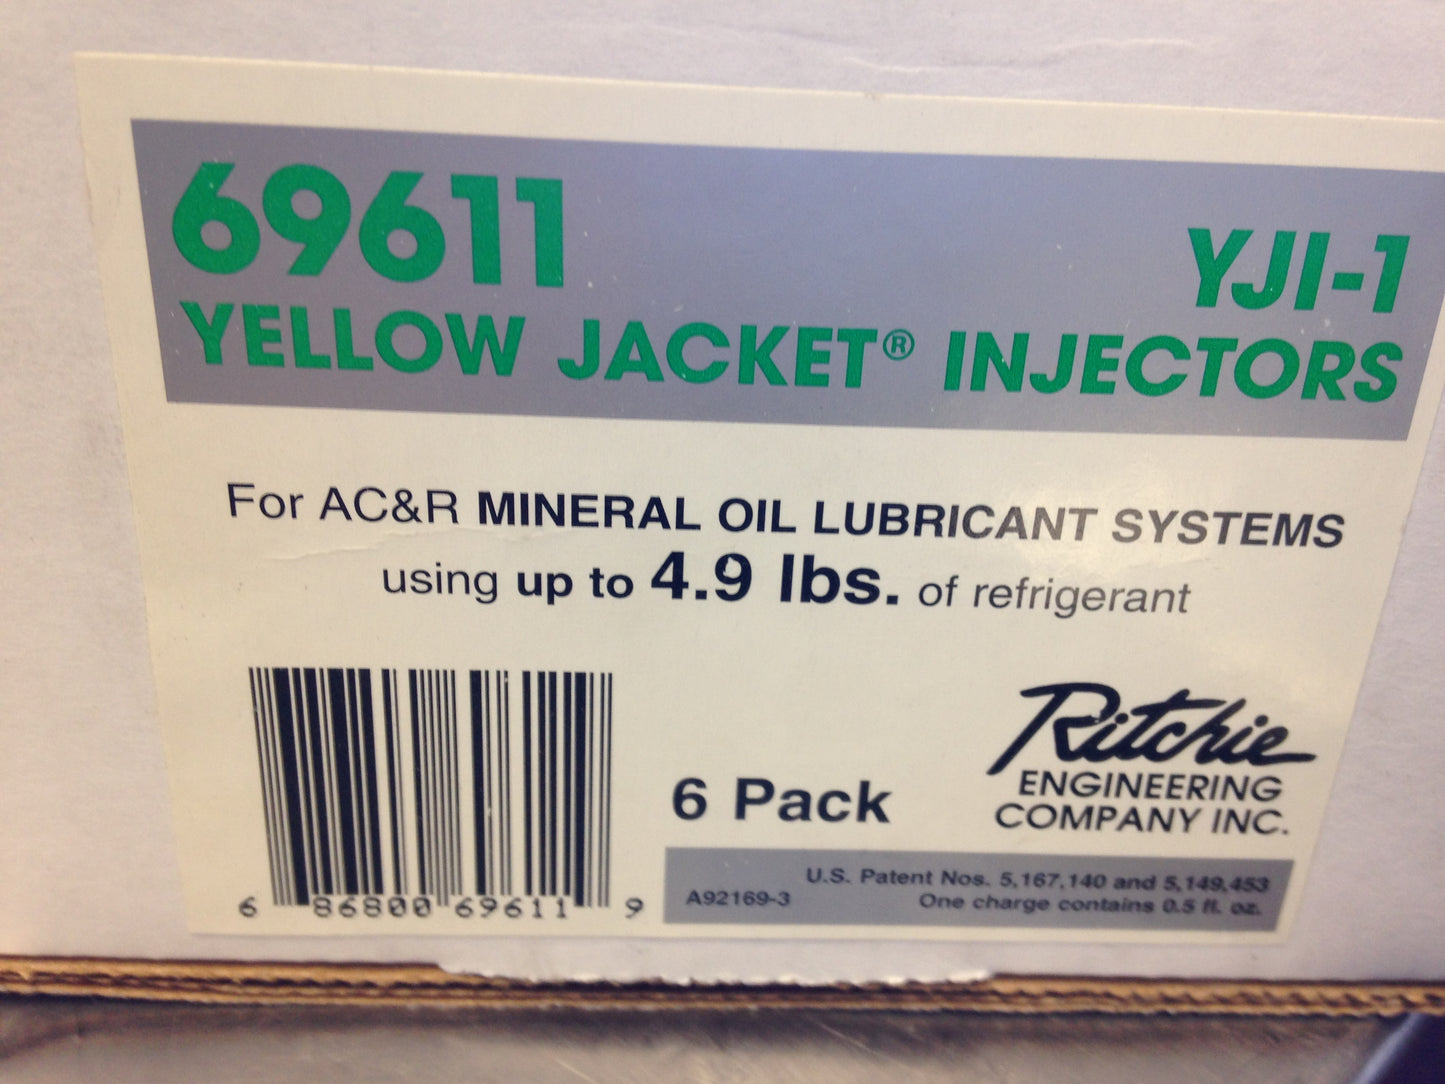 YELLOW JACKET FLUORESCENT LEAK SCANNER SOLUTION     SOLD AS 6 PER BOX